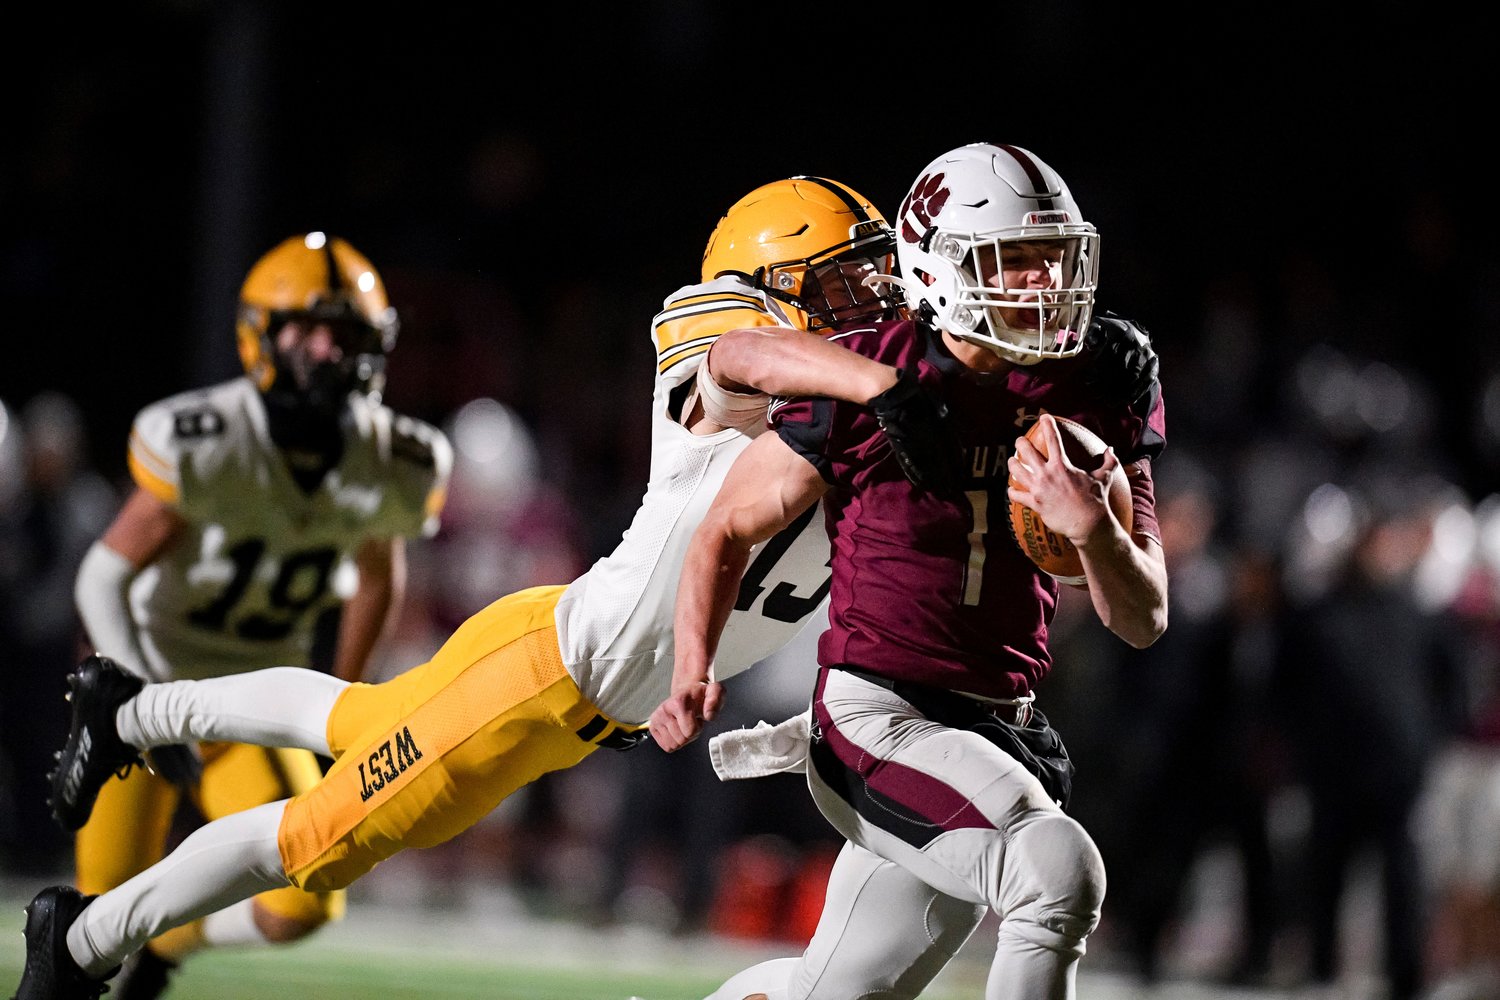 CB West’s Sean Blue leaps on the back of Garnet Valley’s Matthew Mesaros after a long quarterback scramble.